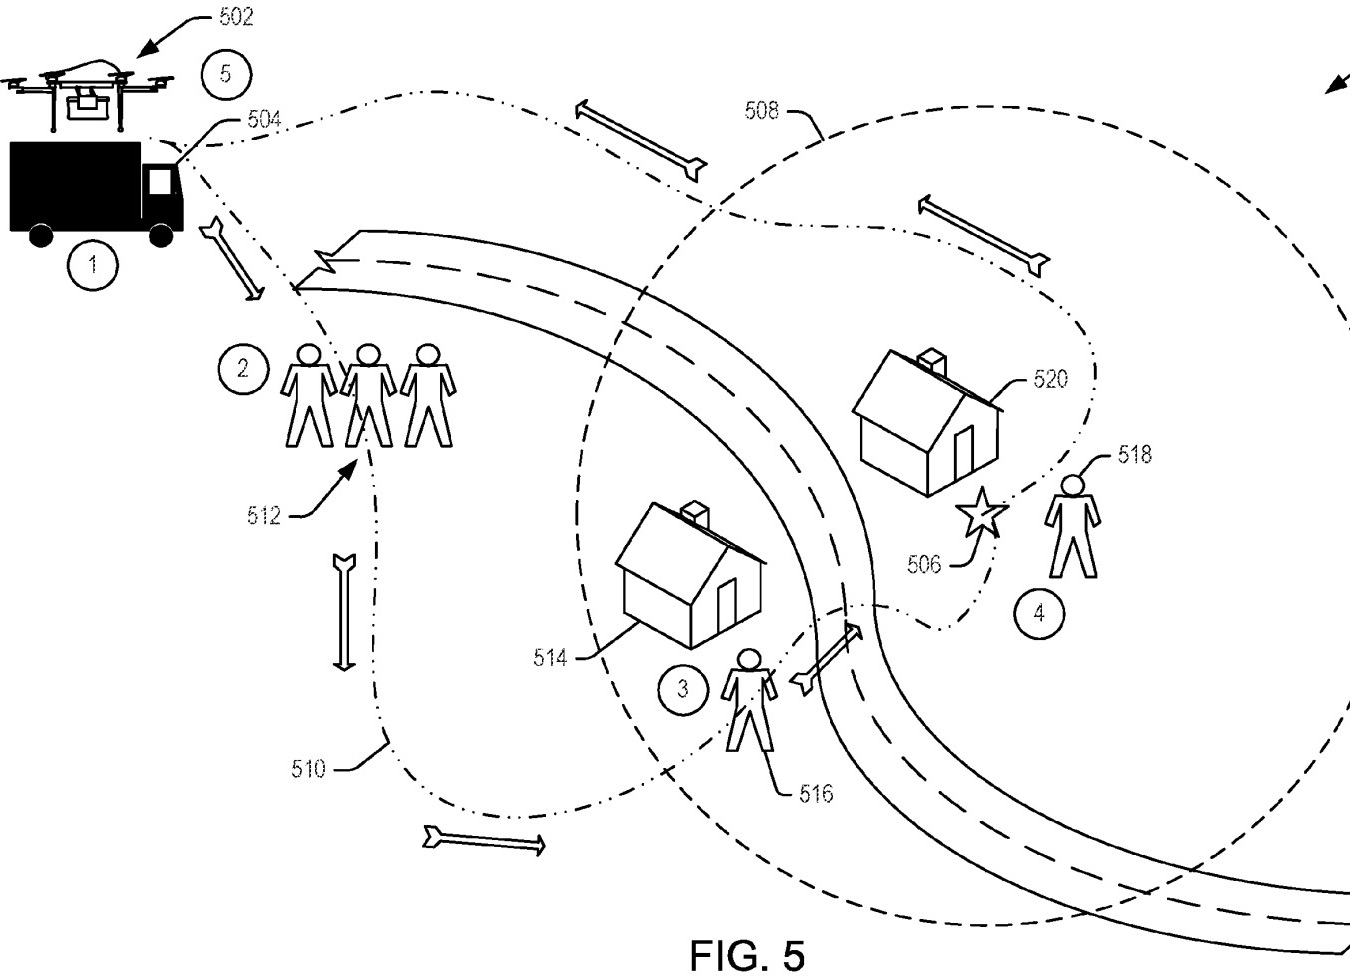 Amazon Patent Points To Future In Which Humanity Is Reduced To Screaming At Drones